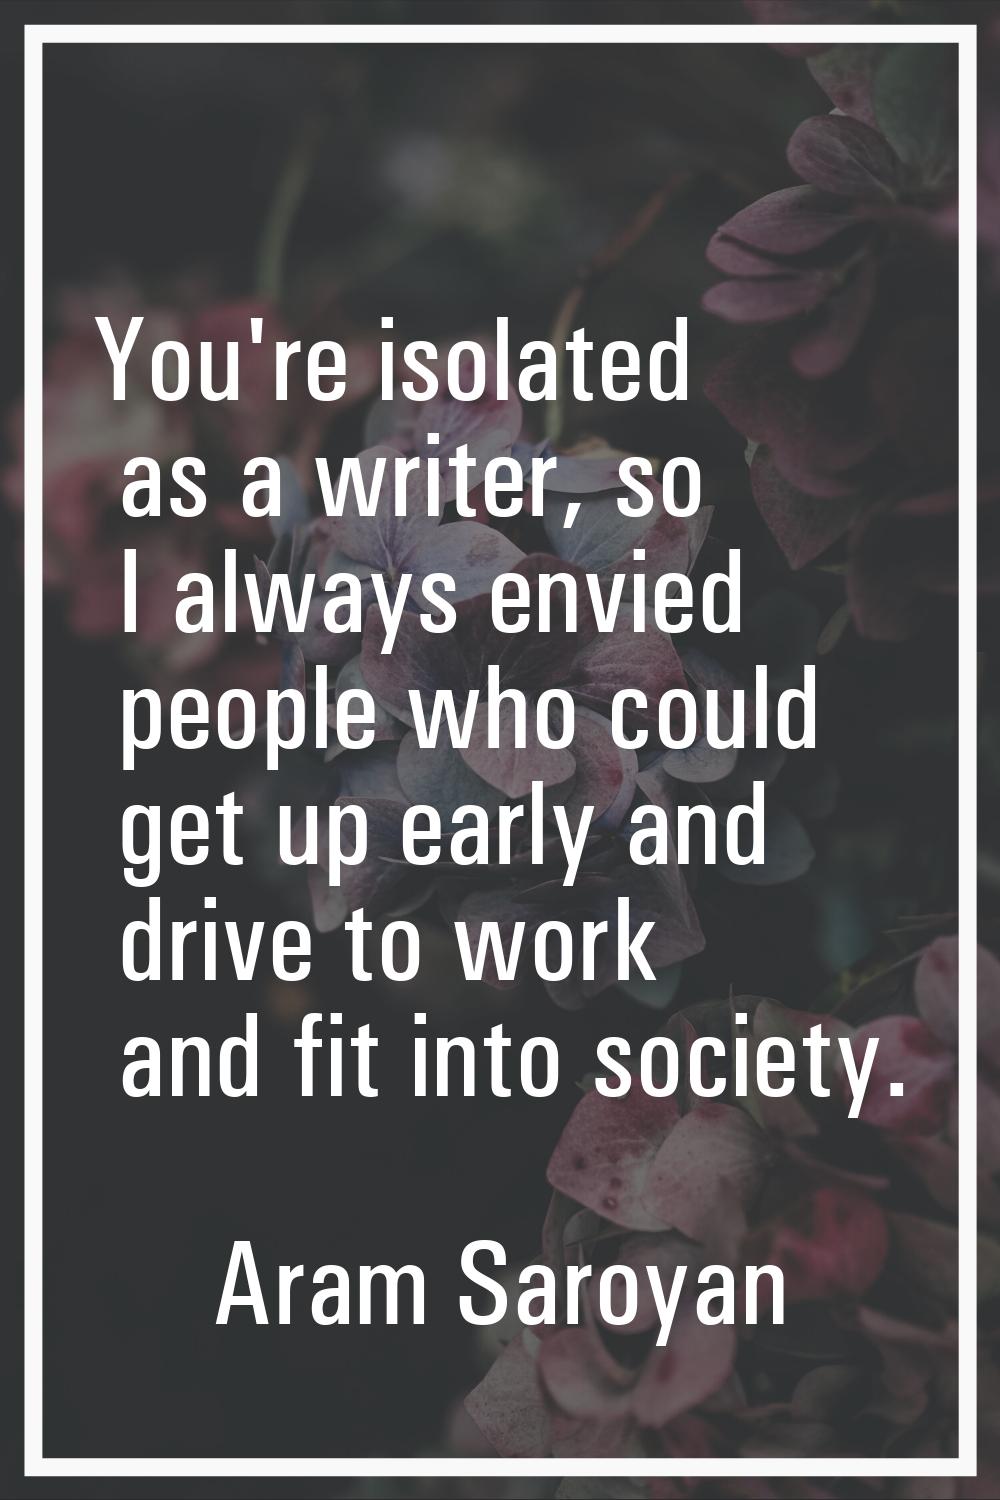 You're isolated as a writer, so I always envied people who could get up early and drive to work and